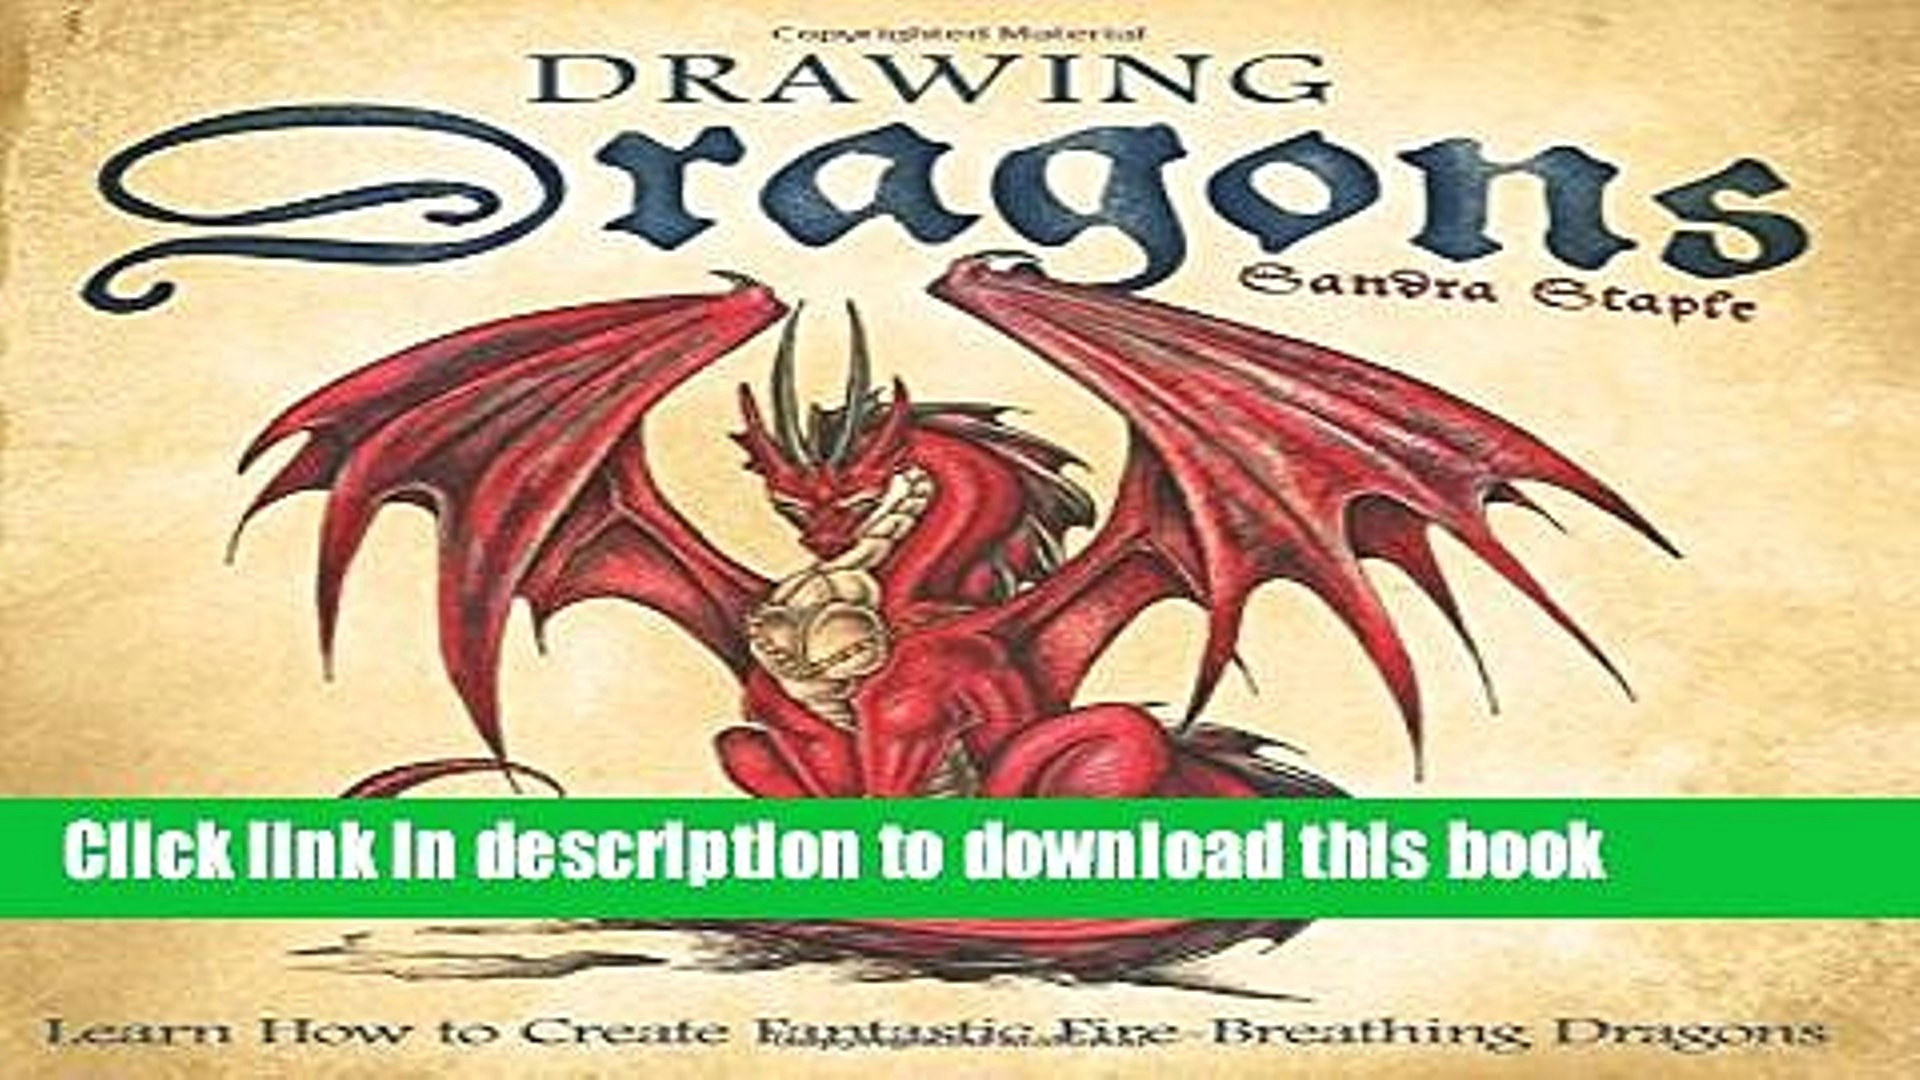 pdf drawing dragons learn how to create fantastic fire breathing dragons full online video dailymotion